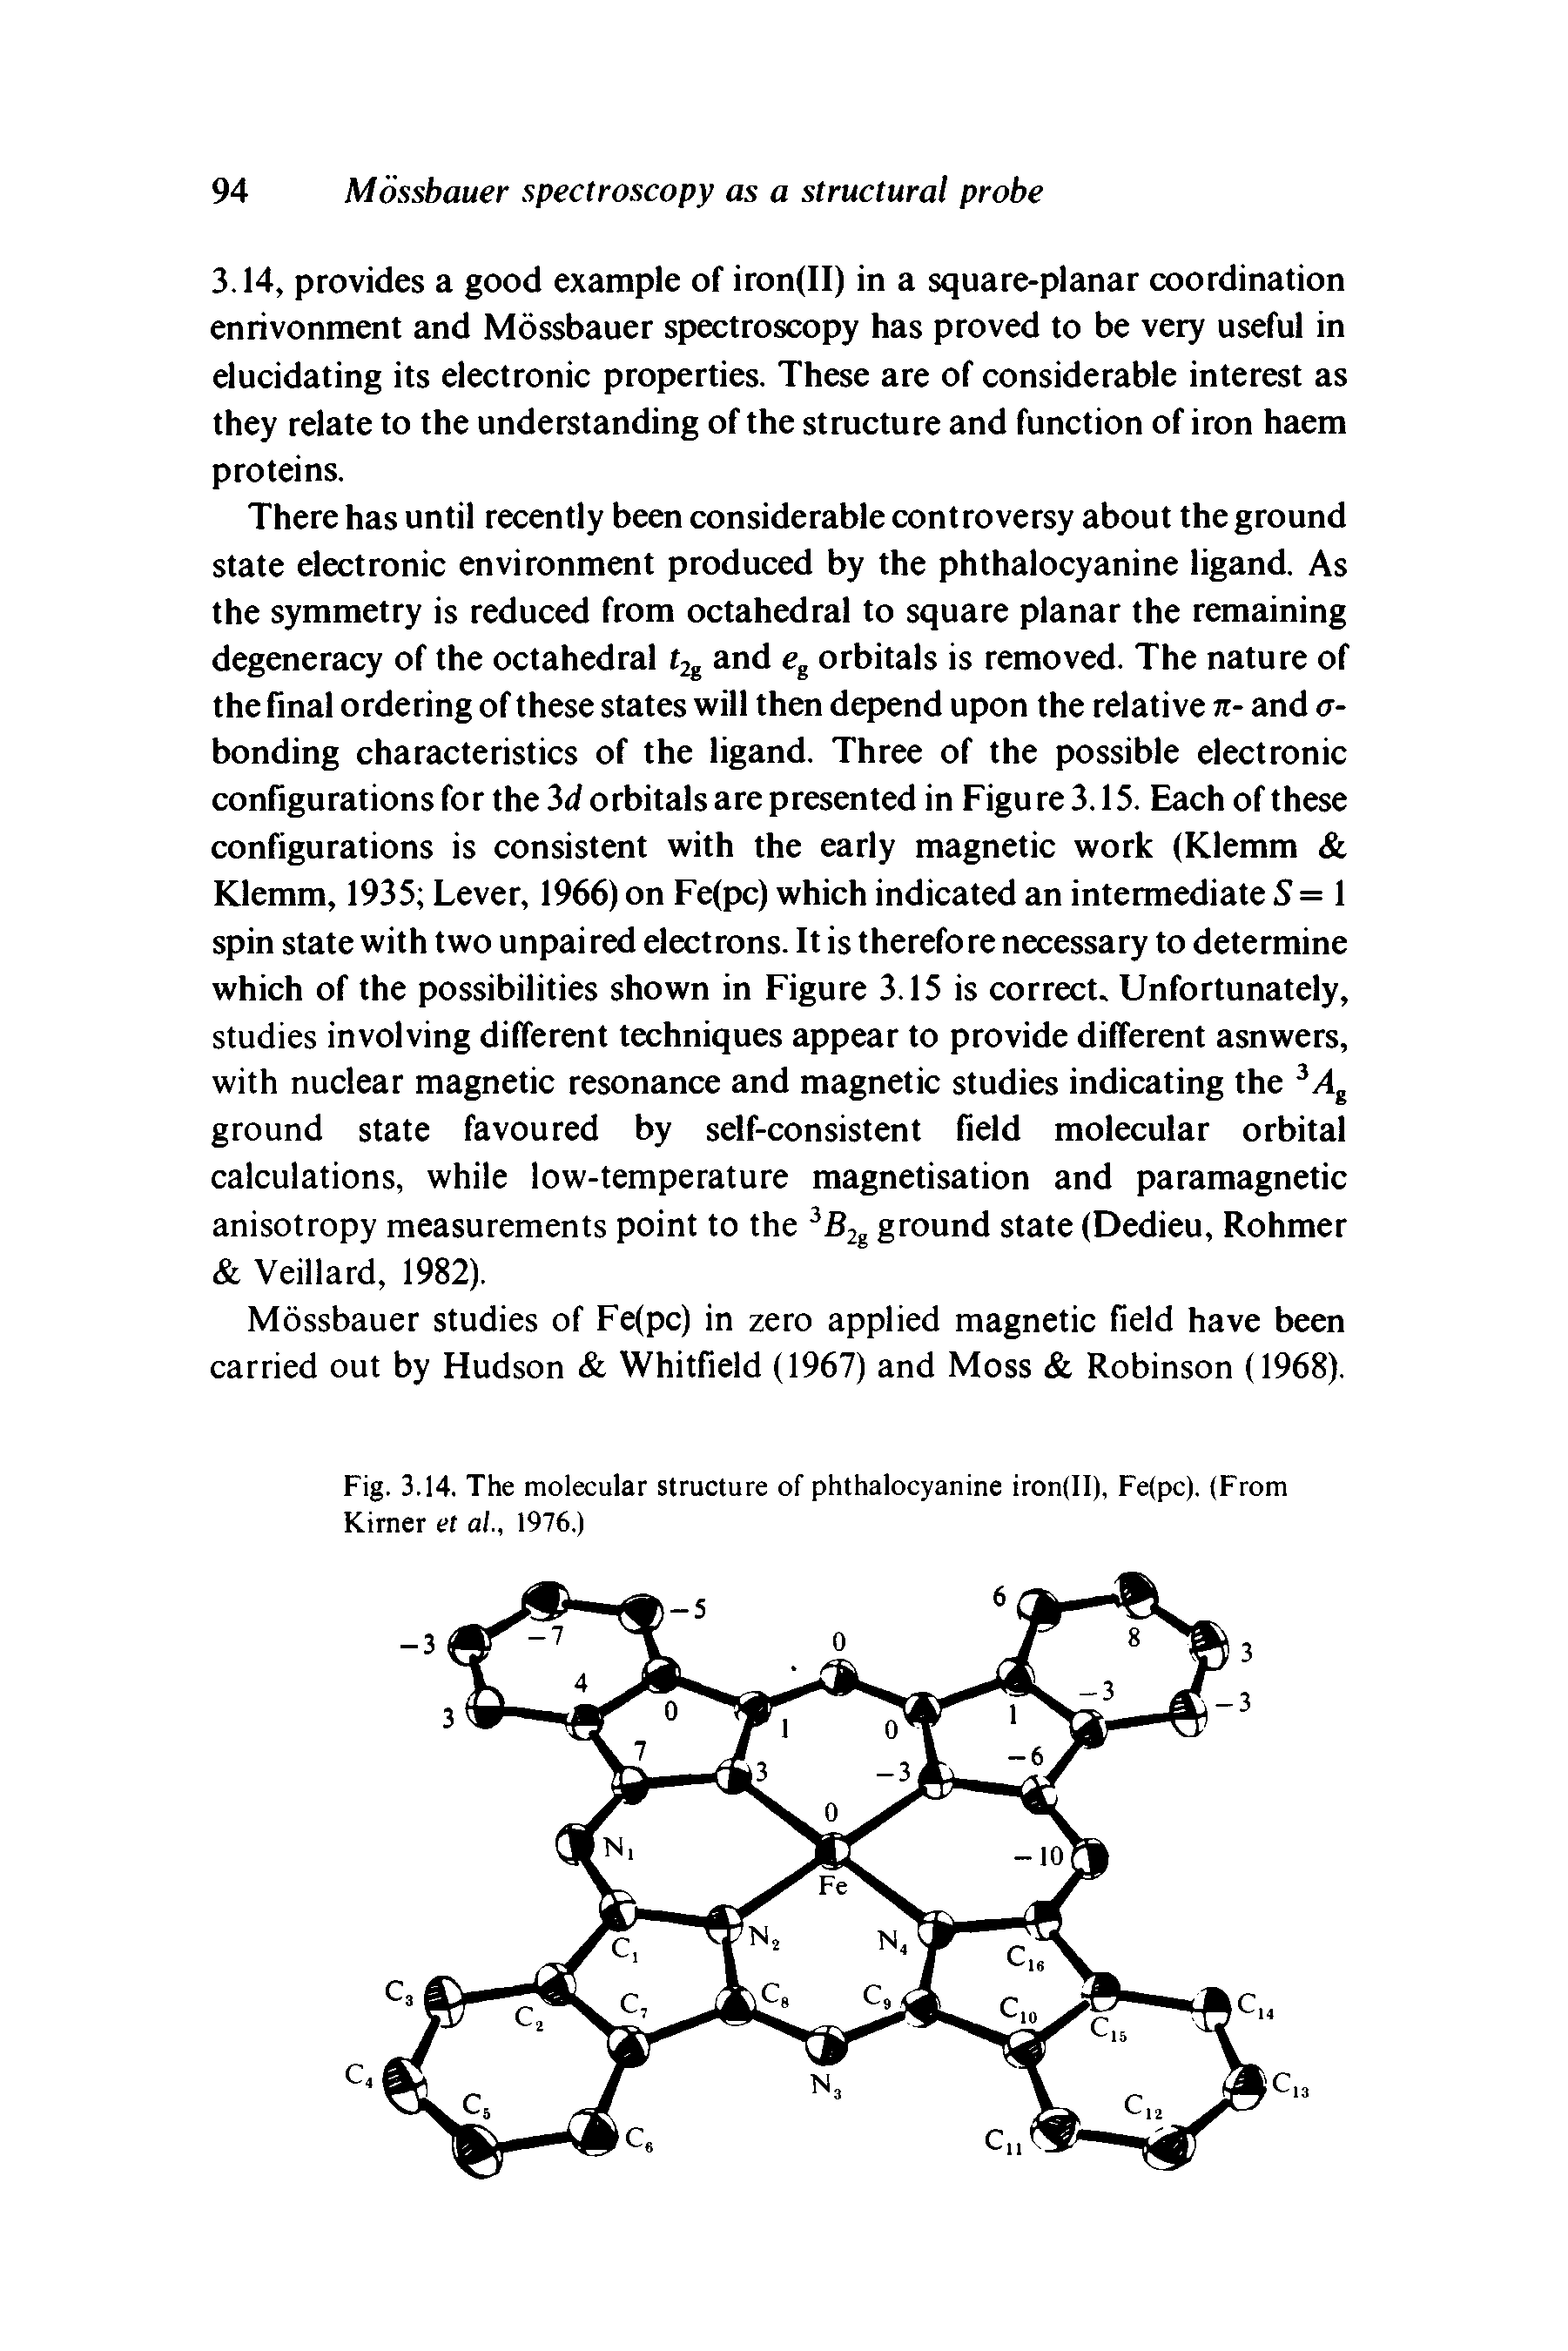 Fig. 3.14. The molecular structure of phthalocyanine iron(II), Fe(pc). (From Kirner et al., 1976.)...